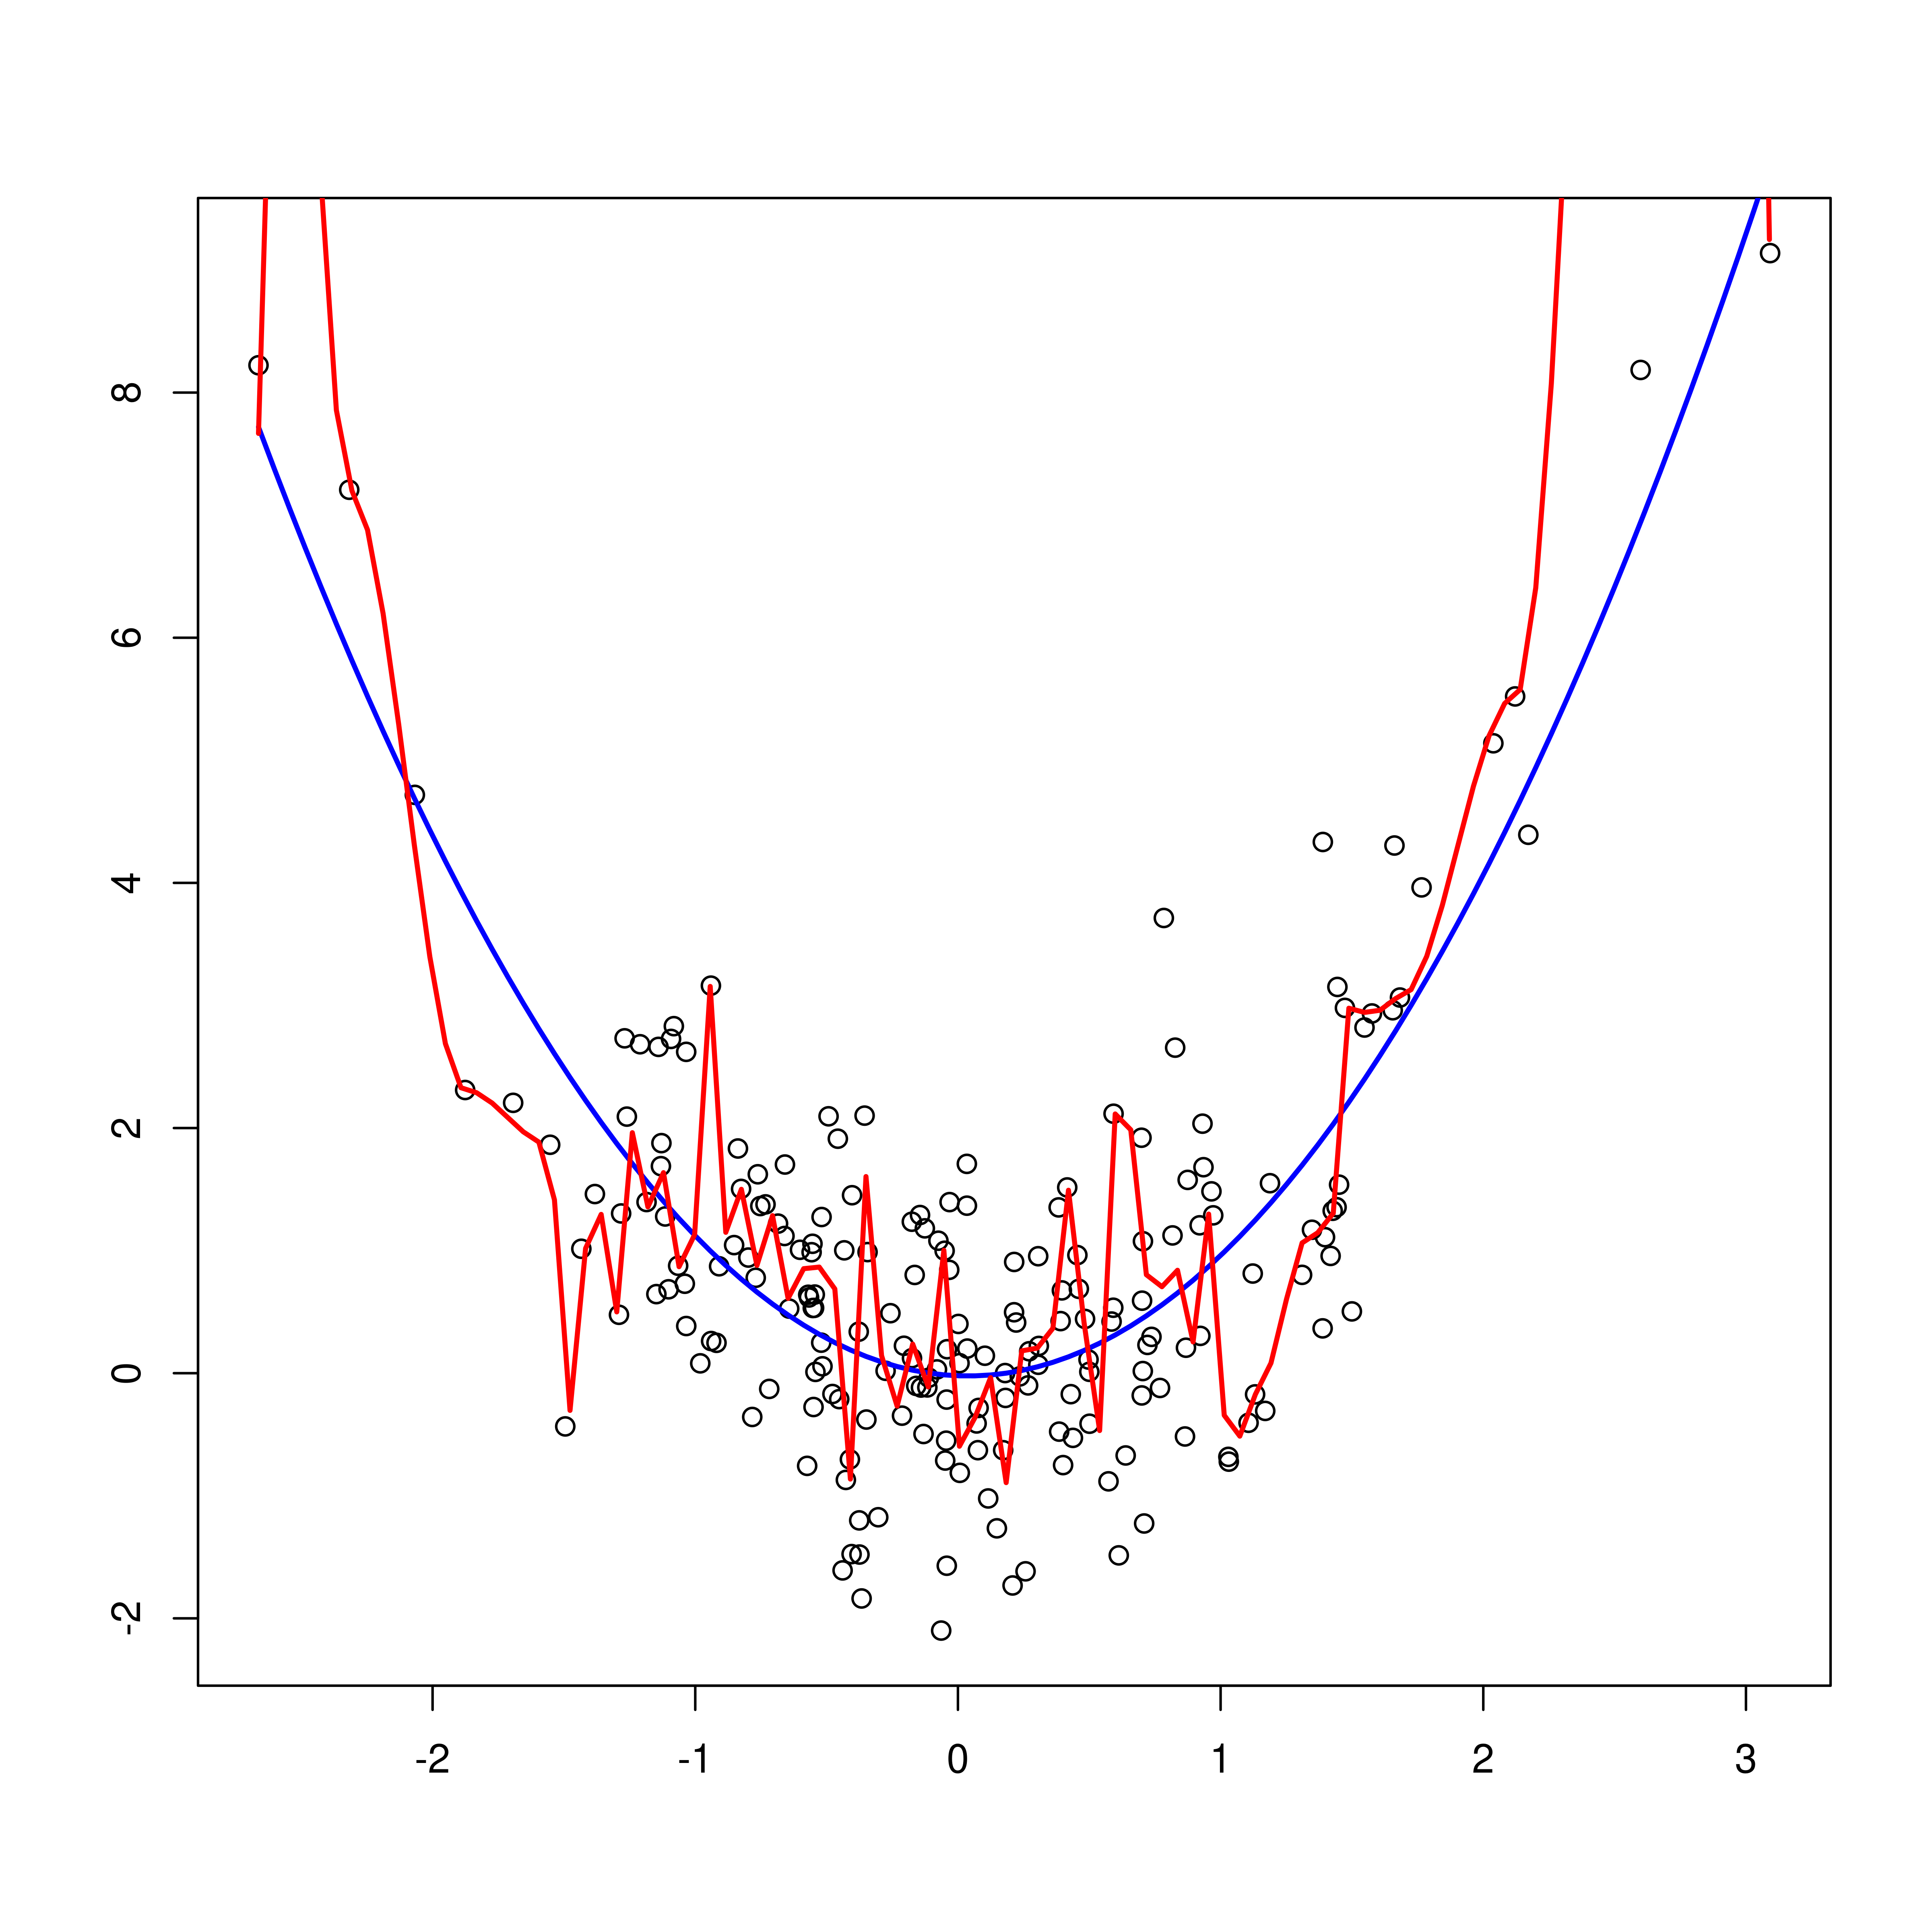 Over-fitting Model in Red Relative to the True Distribution of the Data in Blue.